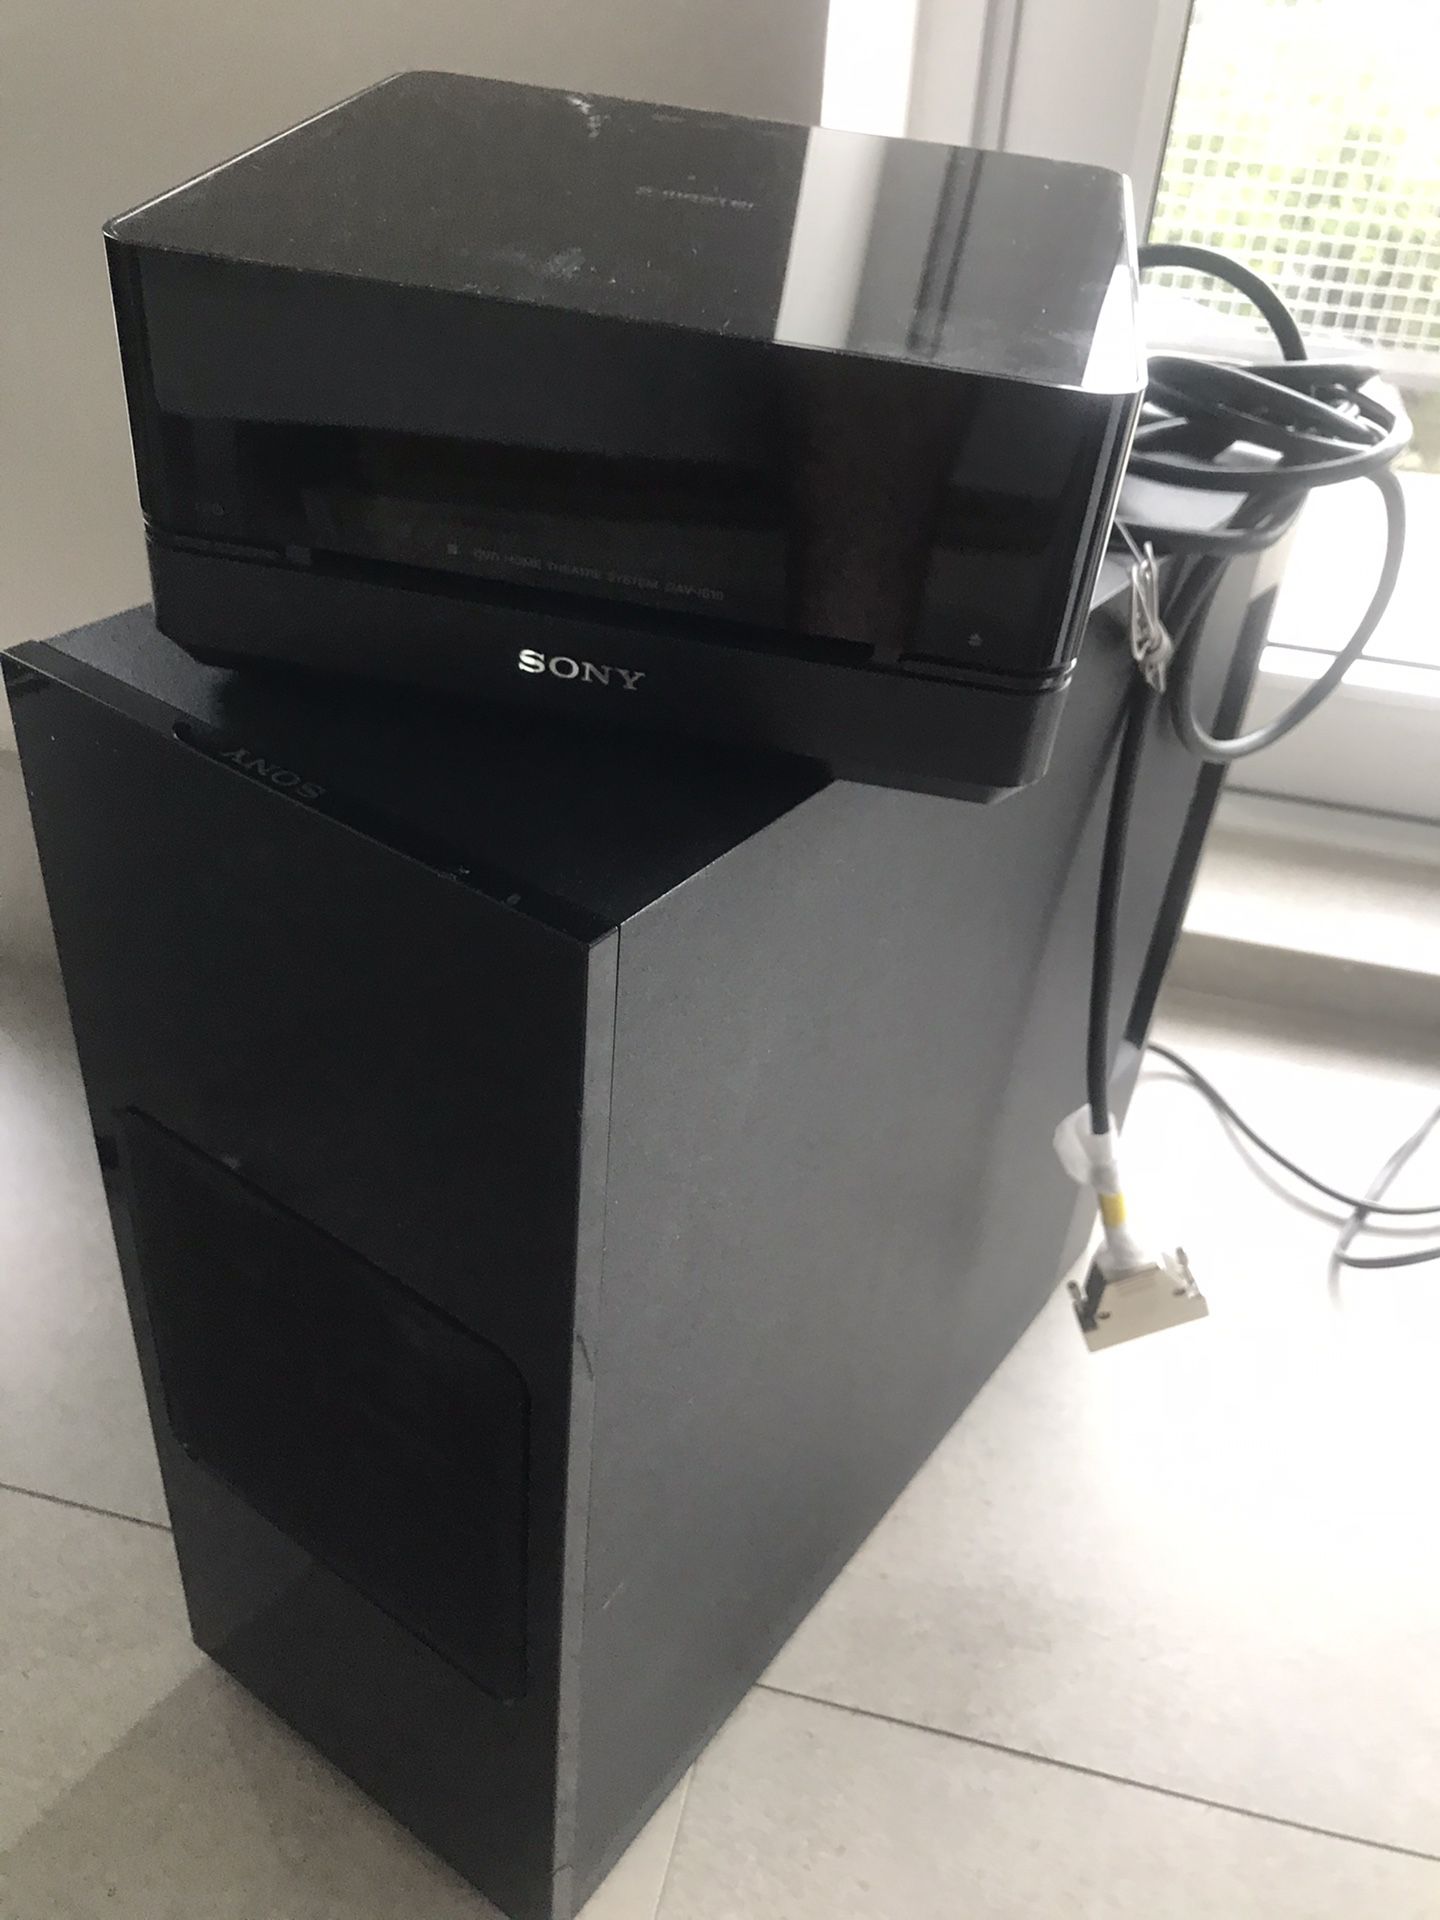 Sony Dvd system with subwoofer